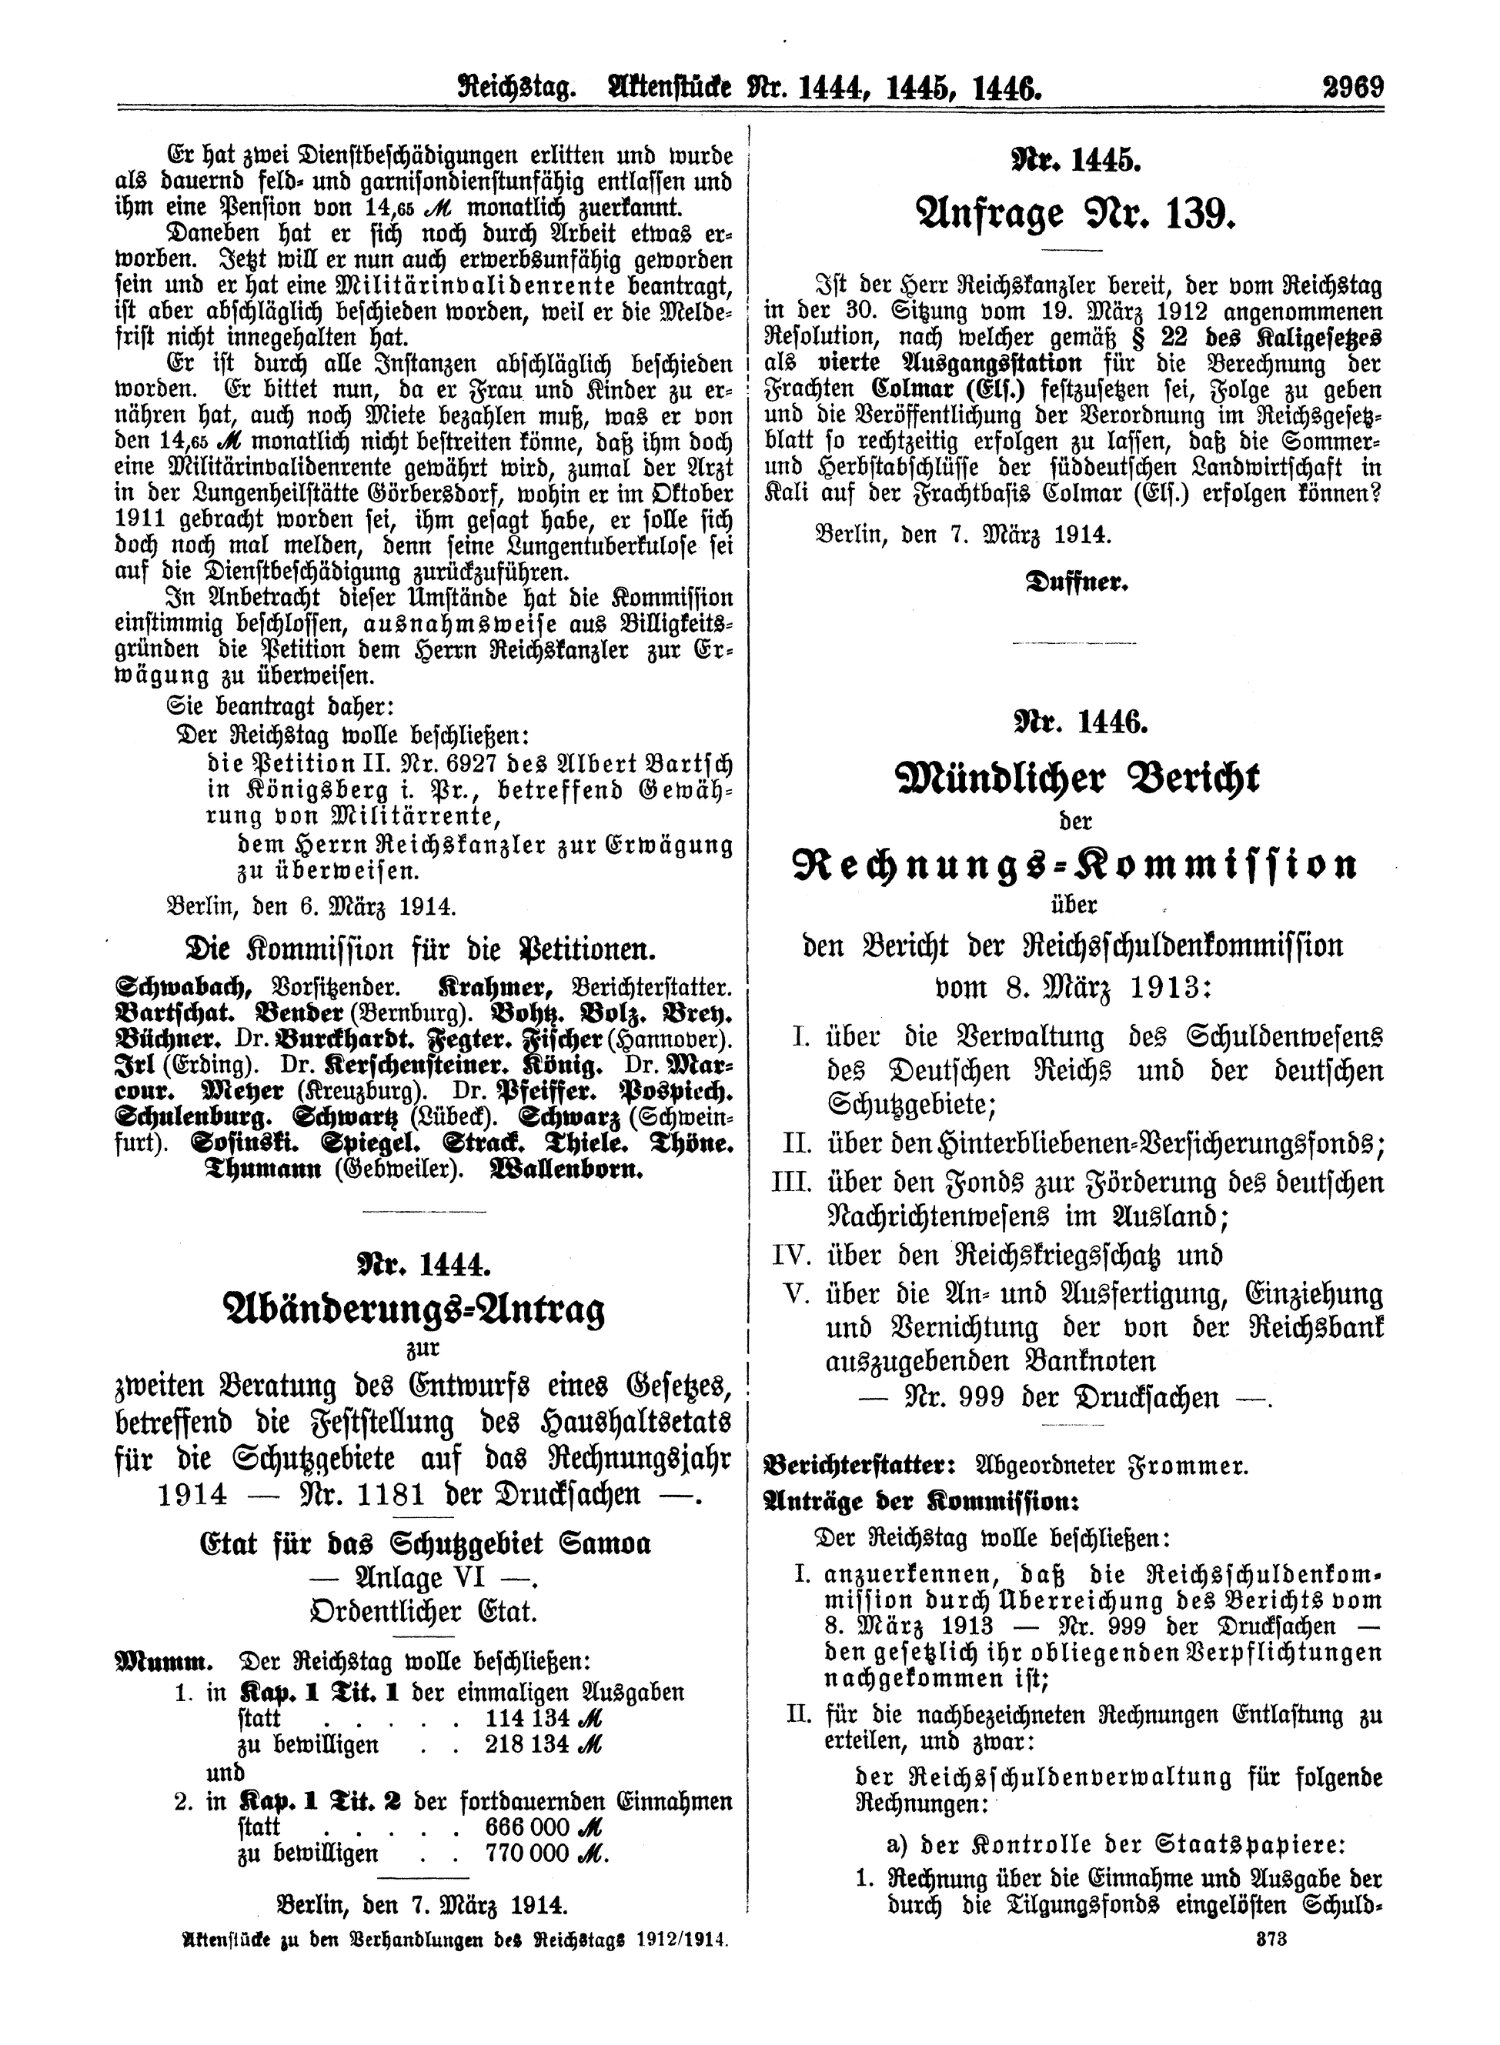 Scan of page 2969